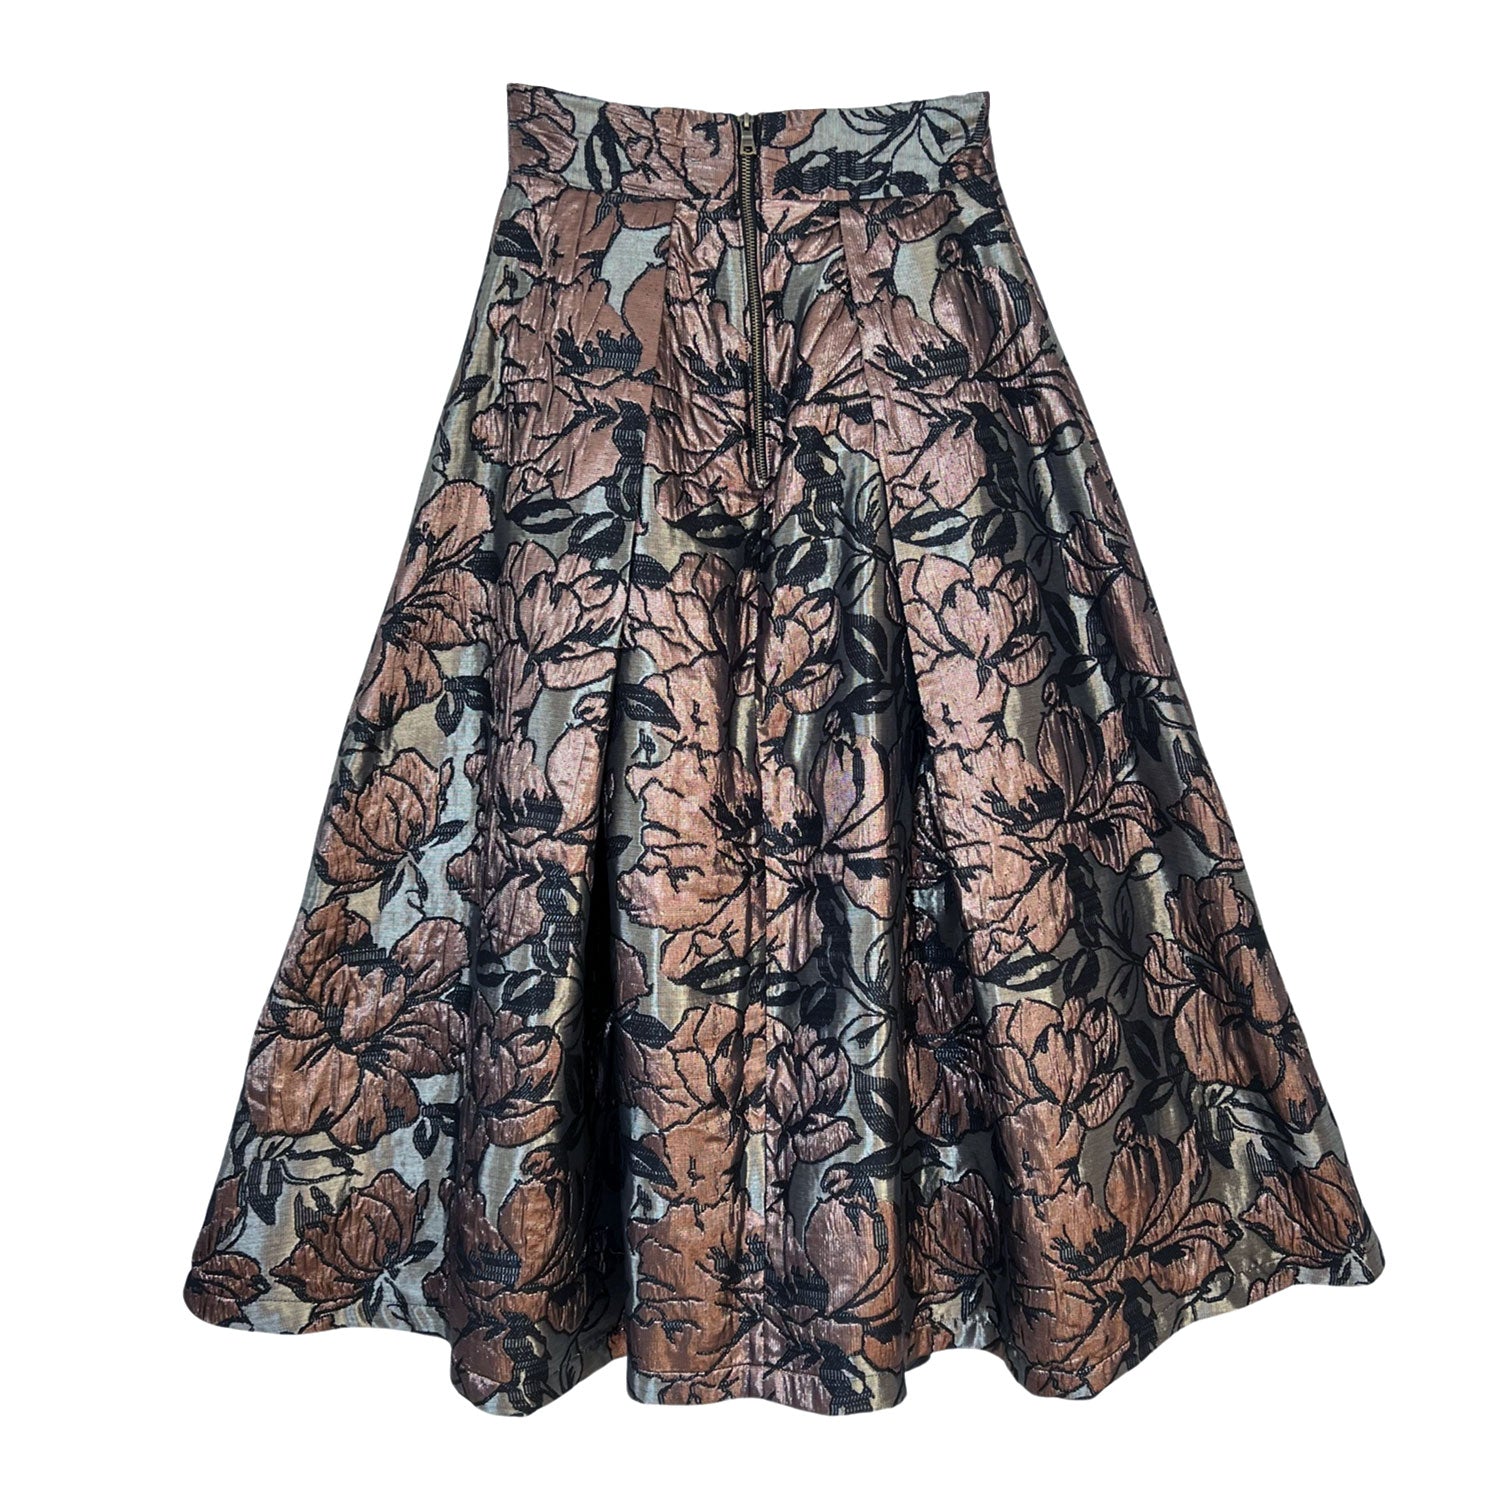 Floral Brocade Midi Skirt in Bronze and Black